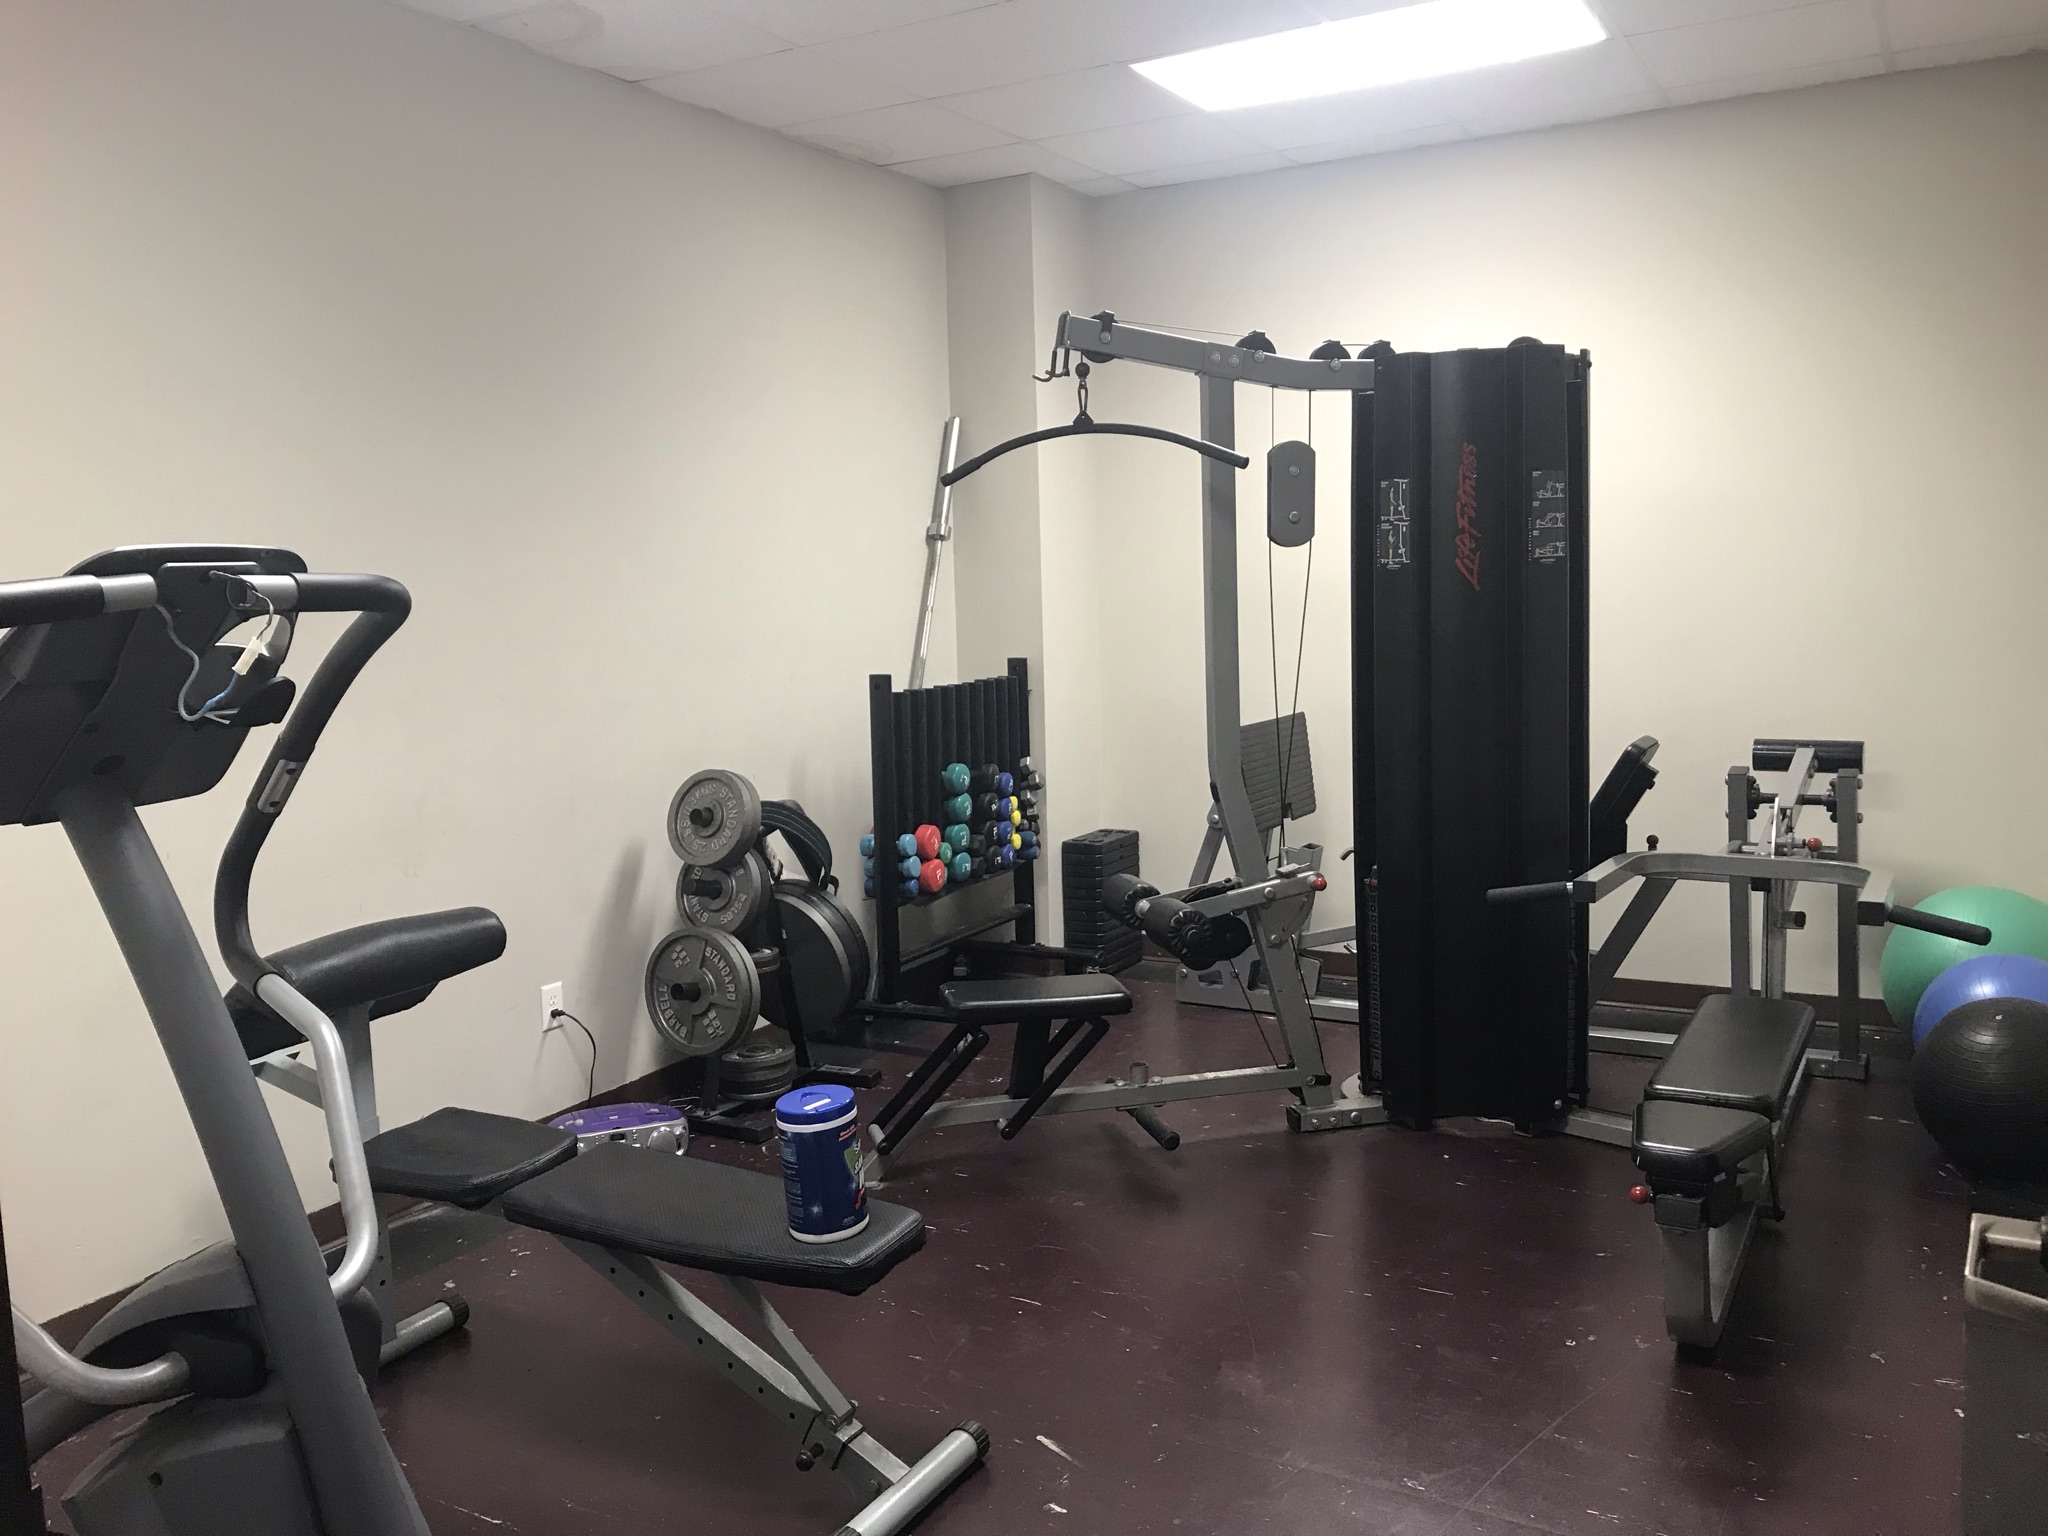 Workout room at Rare Breed Youth Services